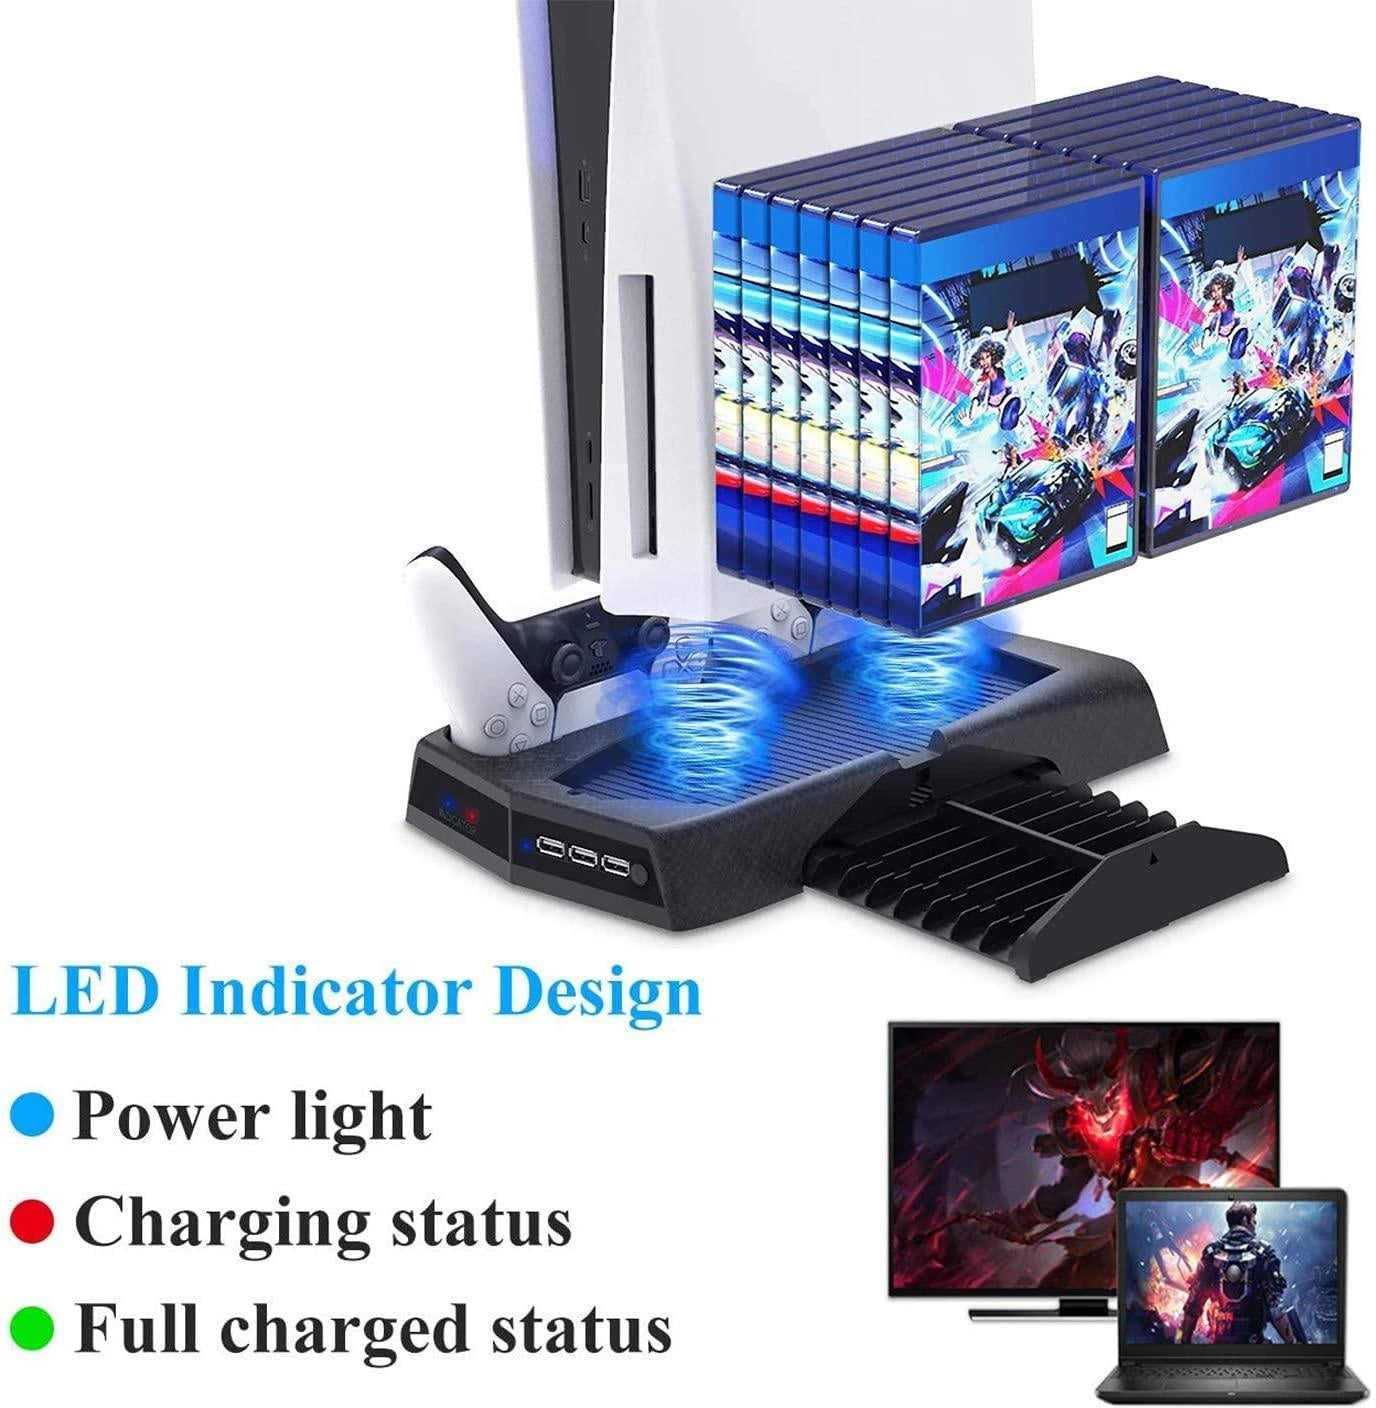 Vertical Stand Cooling/Charging Station for PS5 with Dual Controller Charger and Bonus Game Rack Storage 3 USB Ports Deals499